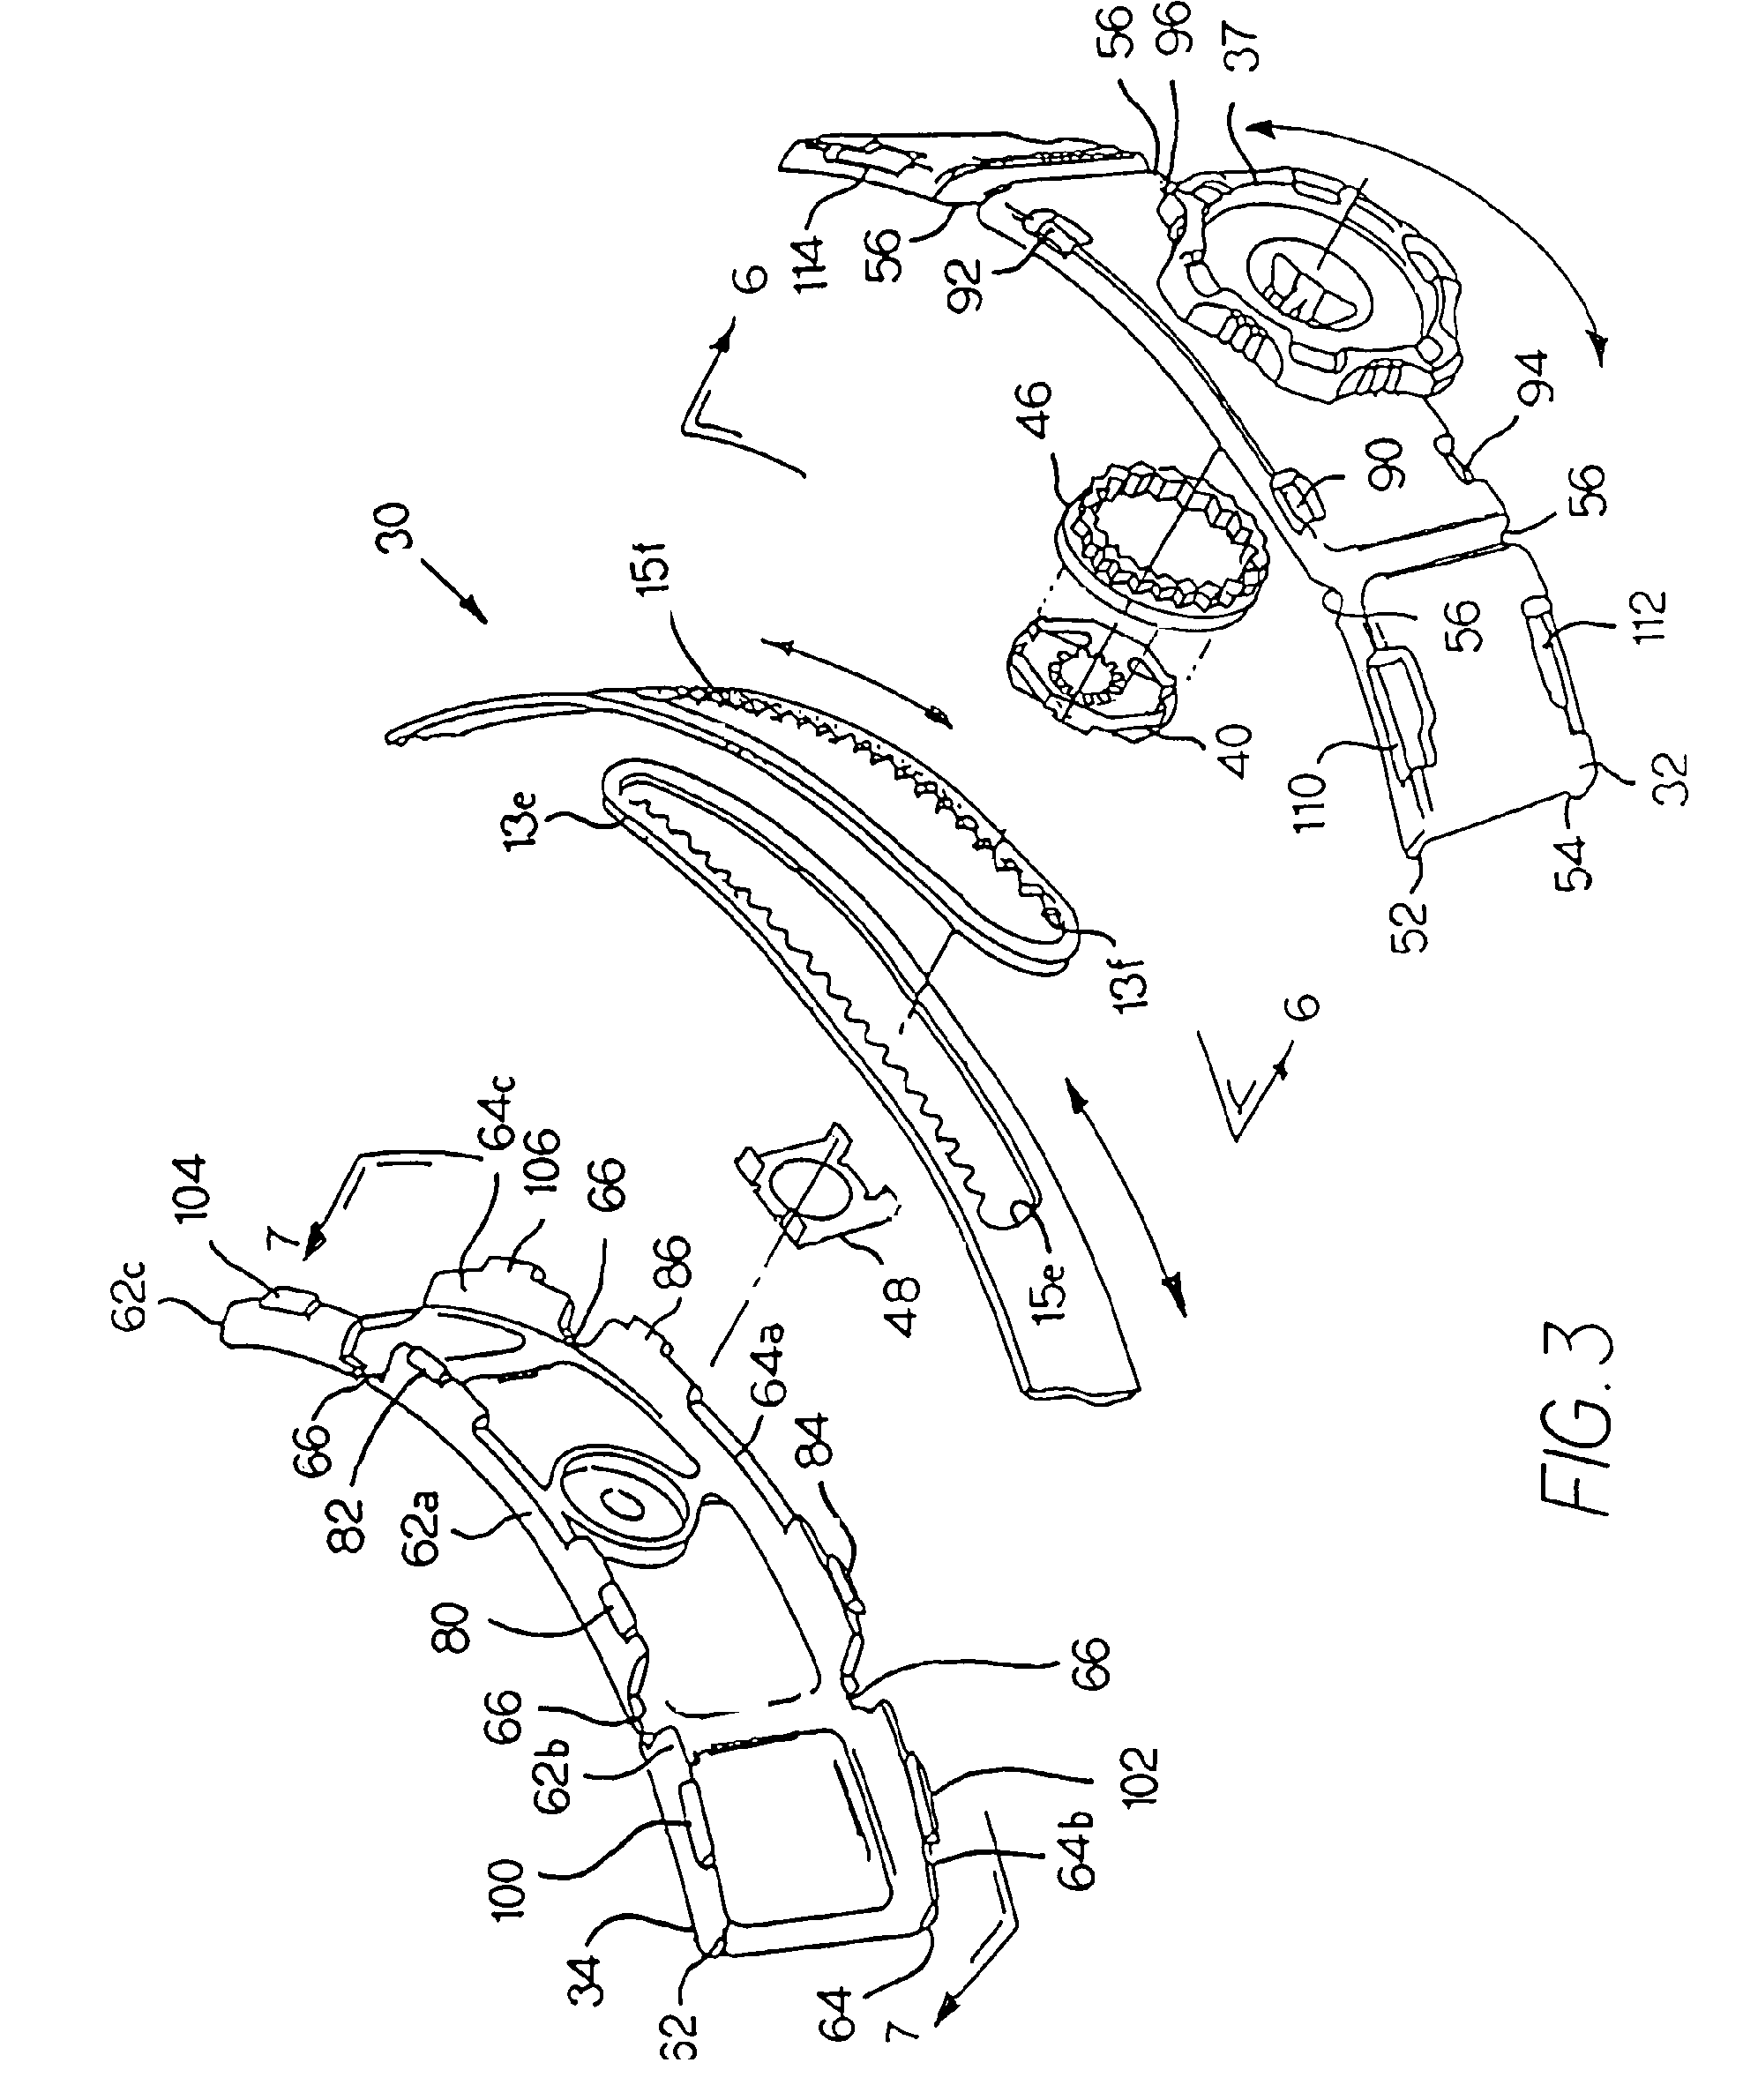 Ratchet mechanism for the headband of protective headgear used in high temperature environments